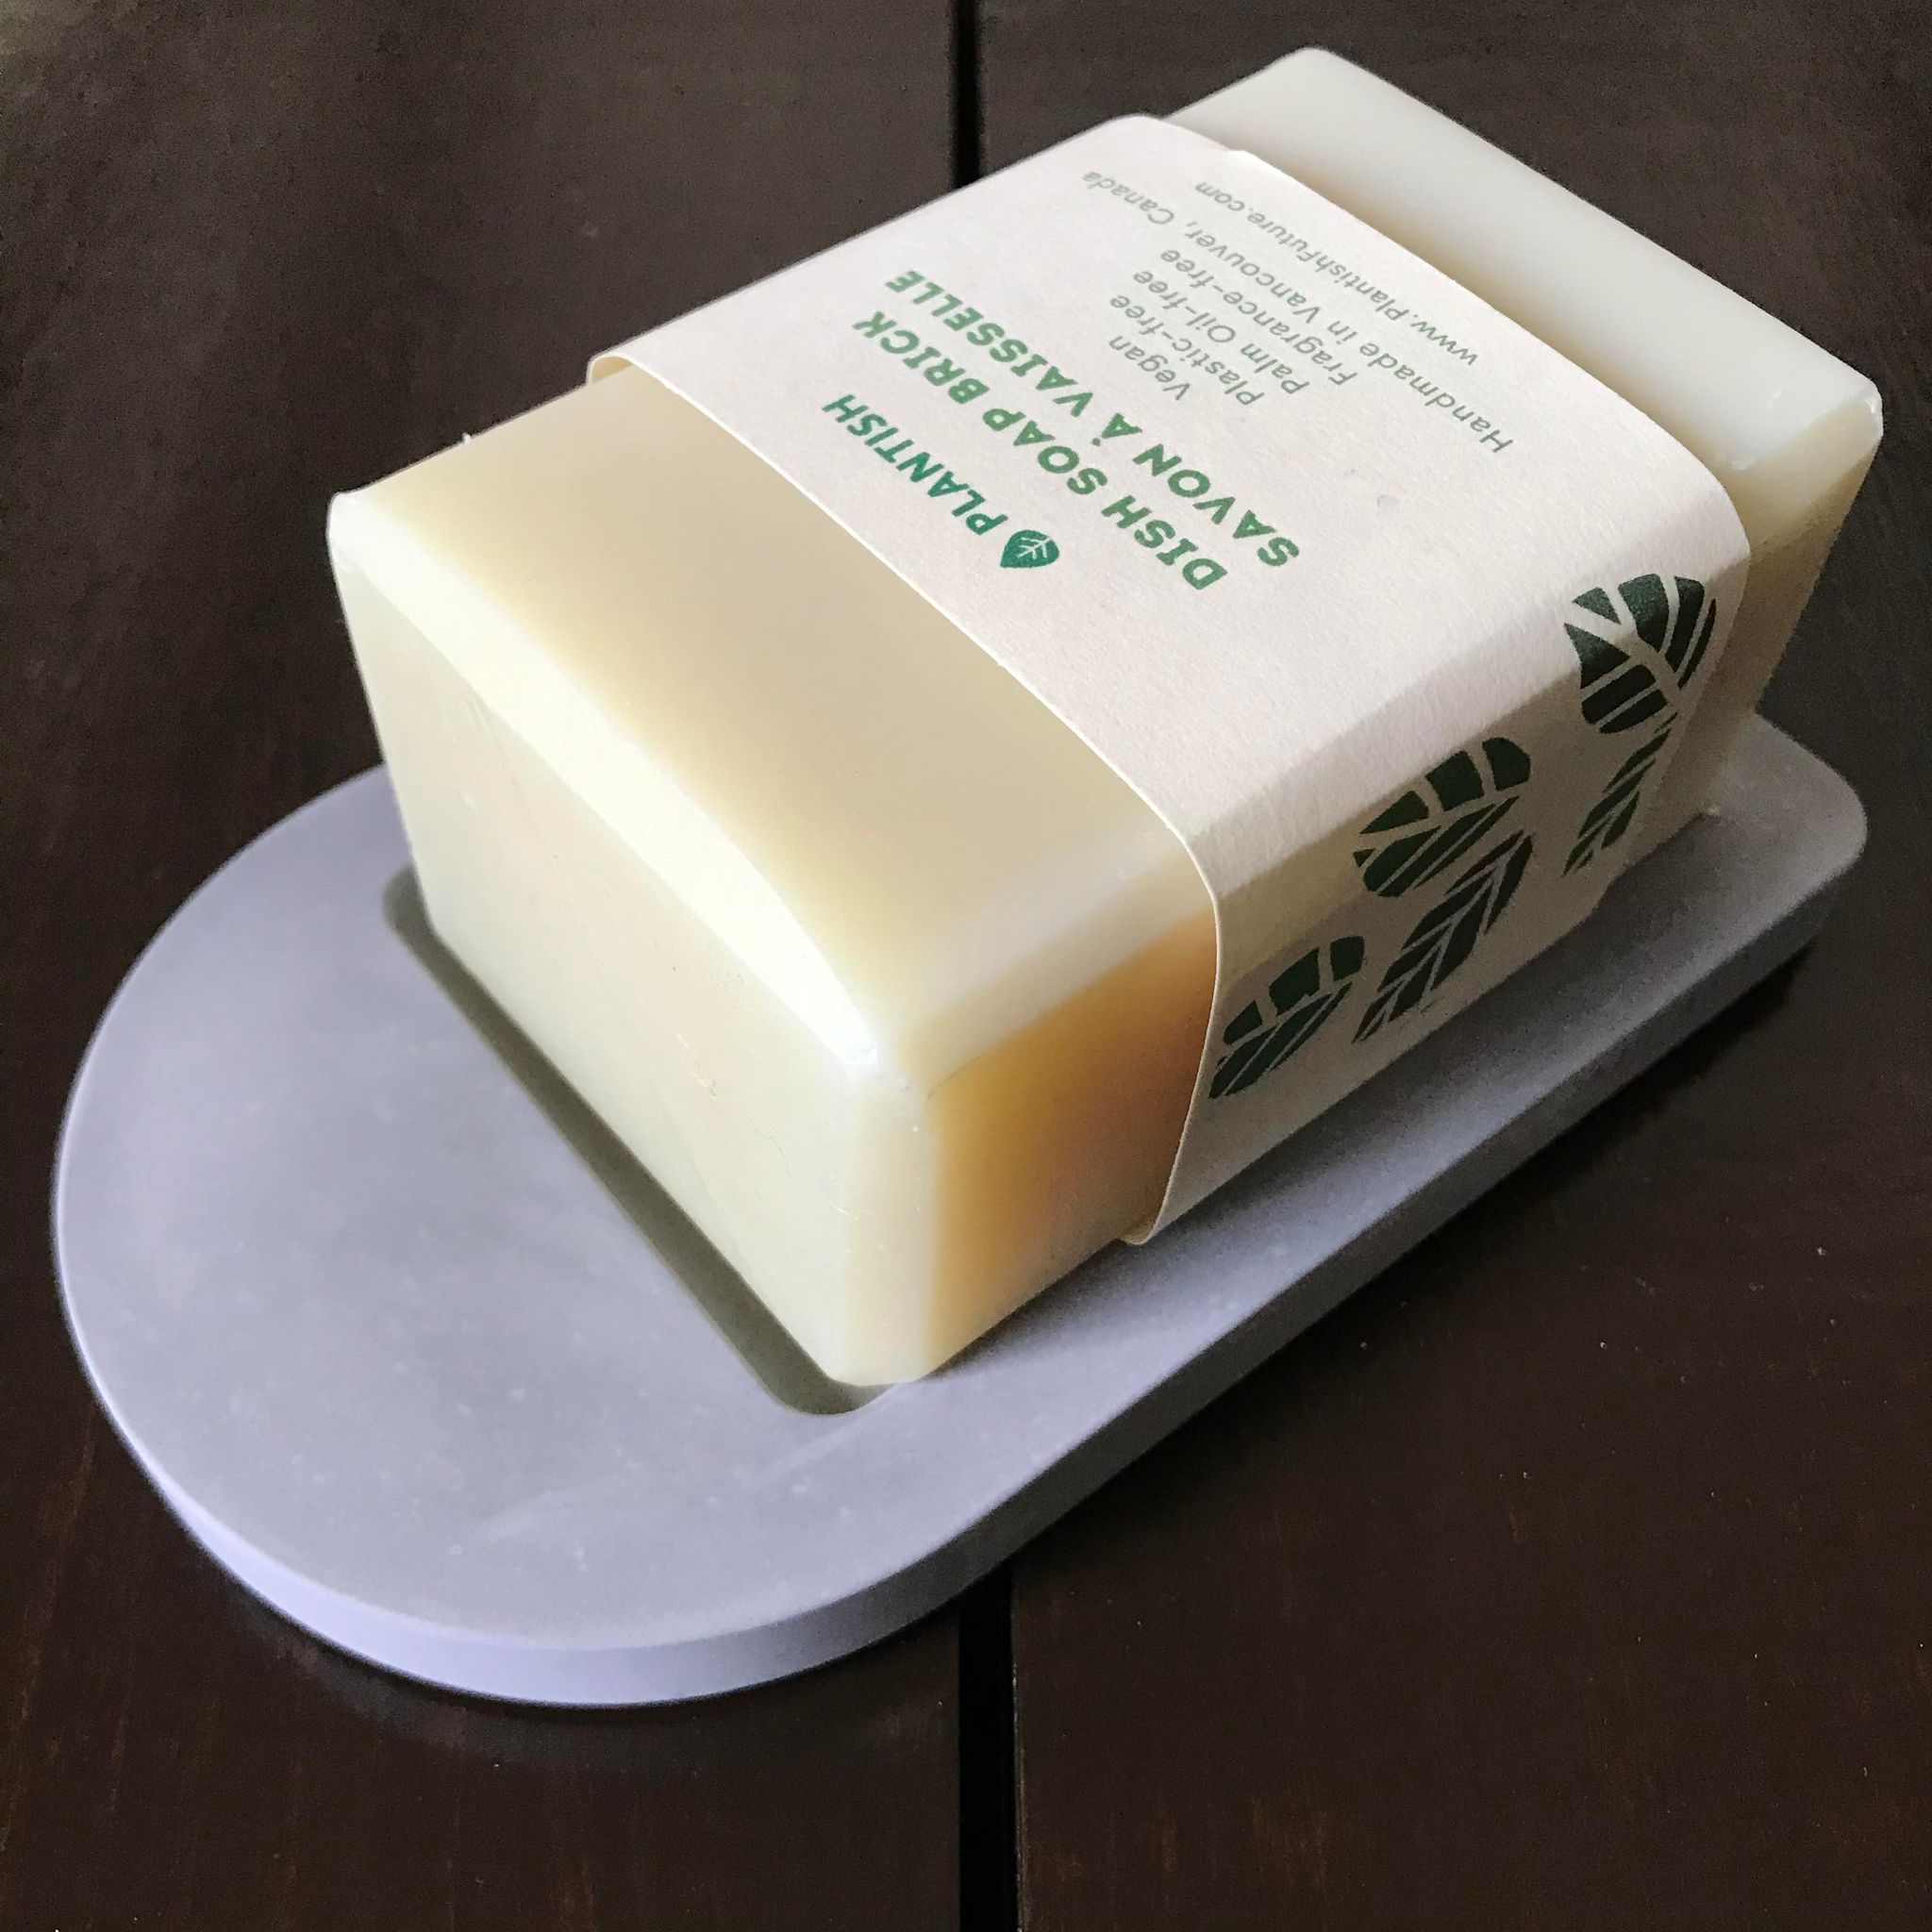 This plantish self drying soap dish is the perfect size for a Plantish dish soap brick, sold separately